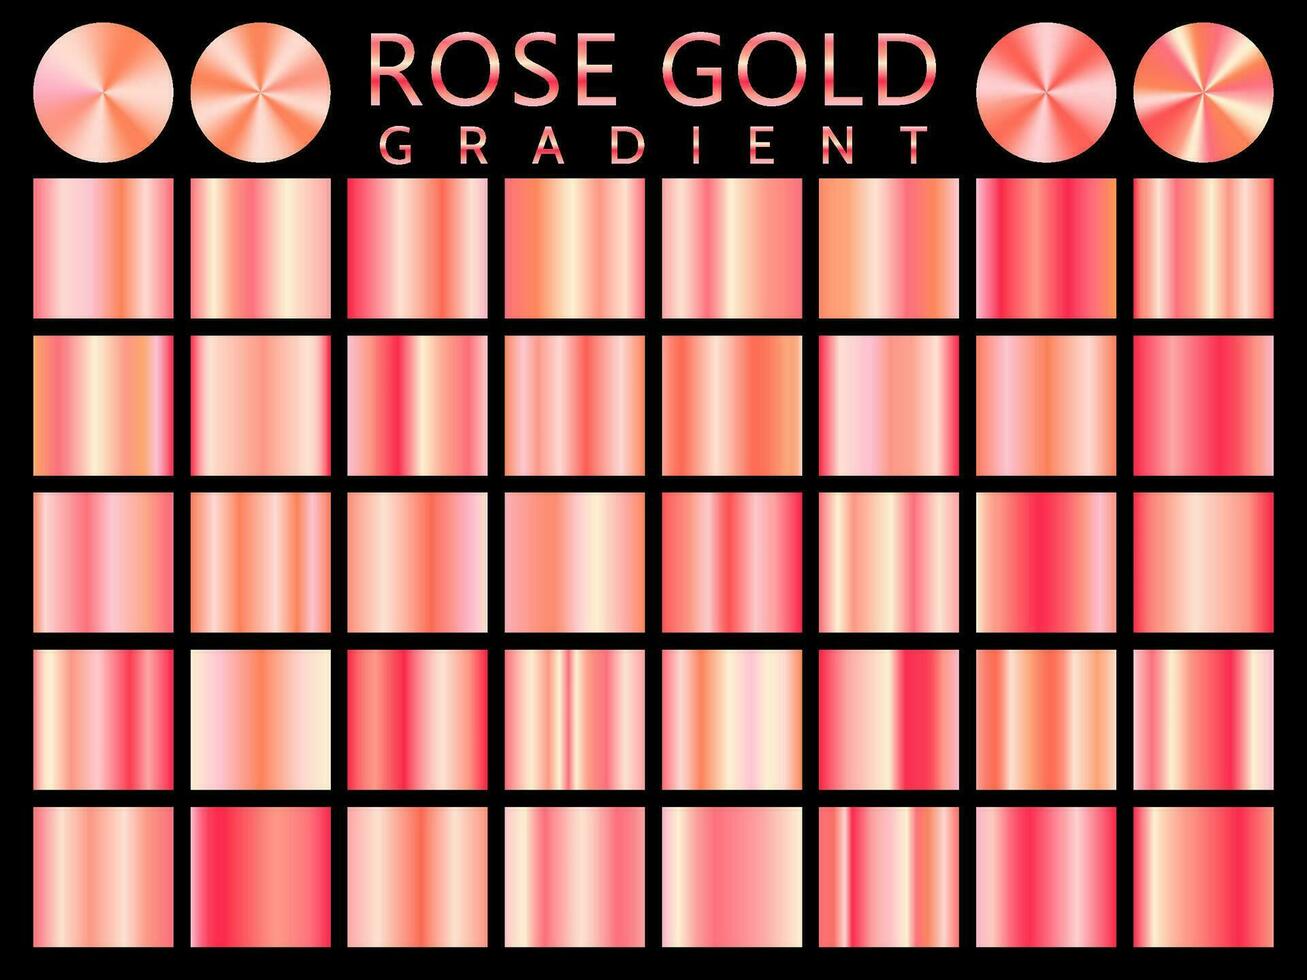 Rose Gold background texture vector icon seamless pattern. Light, realistic, elegant, shiny, metallic and rose gold gradient illustration. Mesh vector. Design for frame, ribbon, coin, abstract